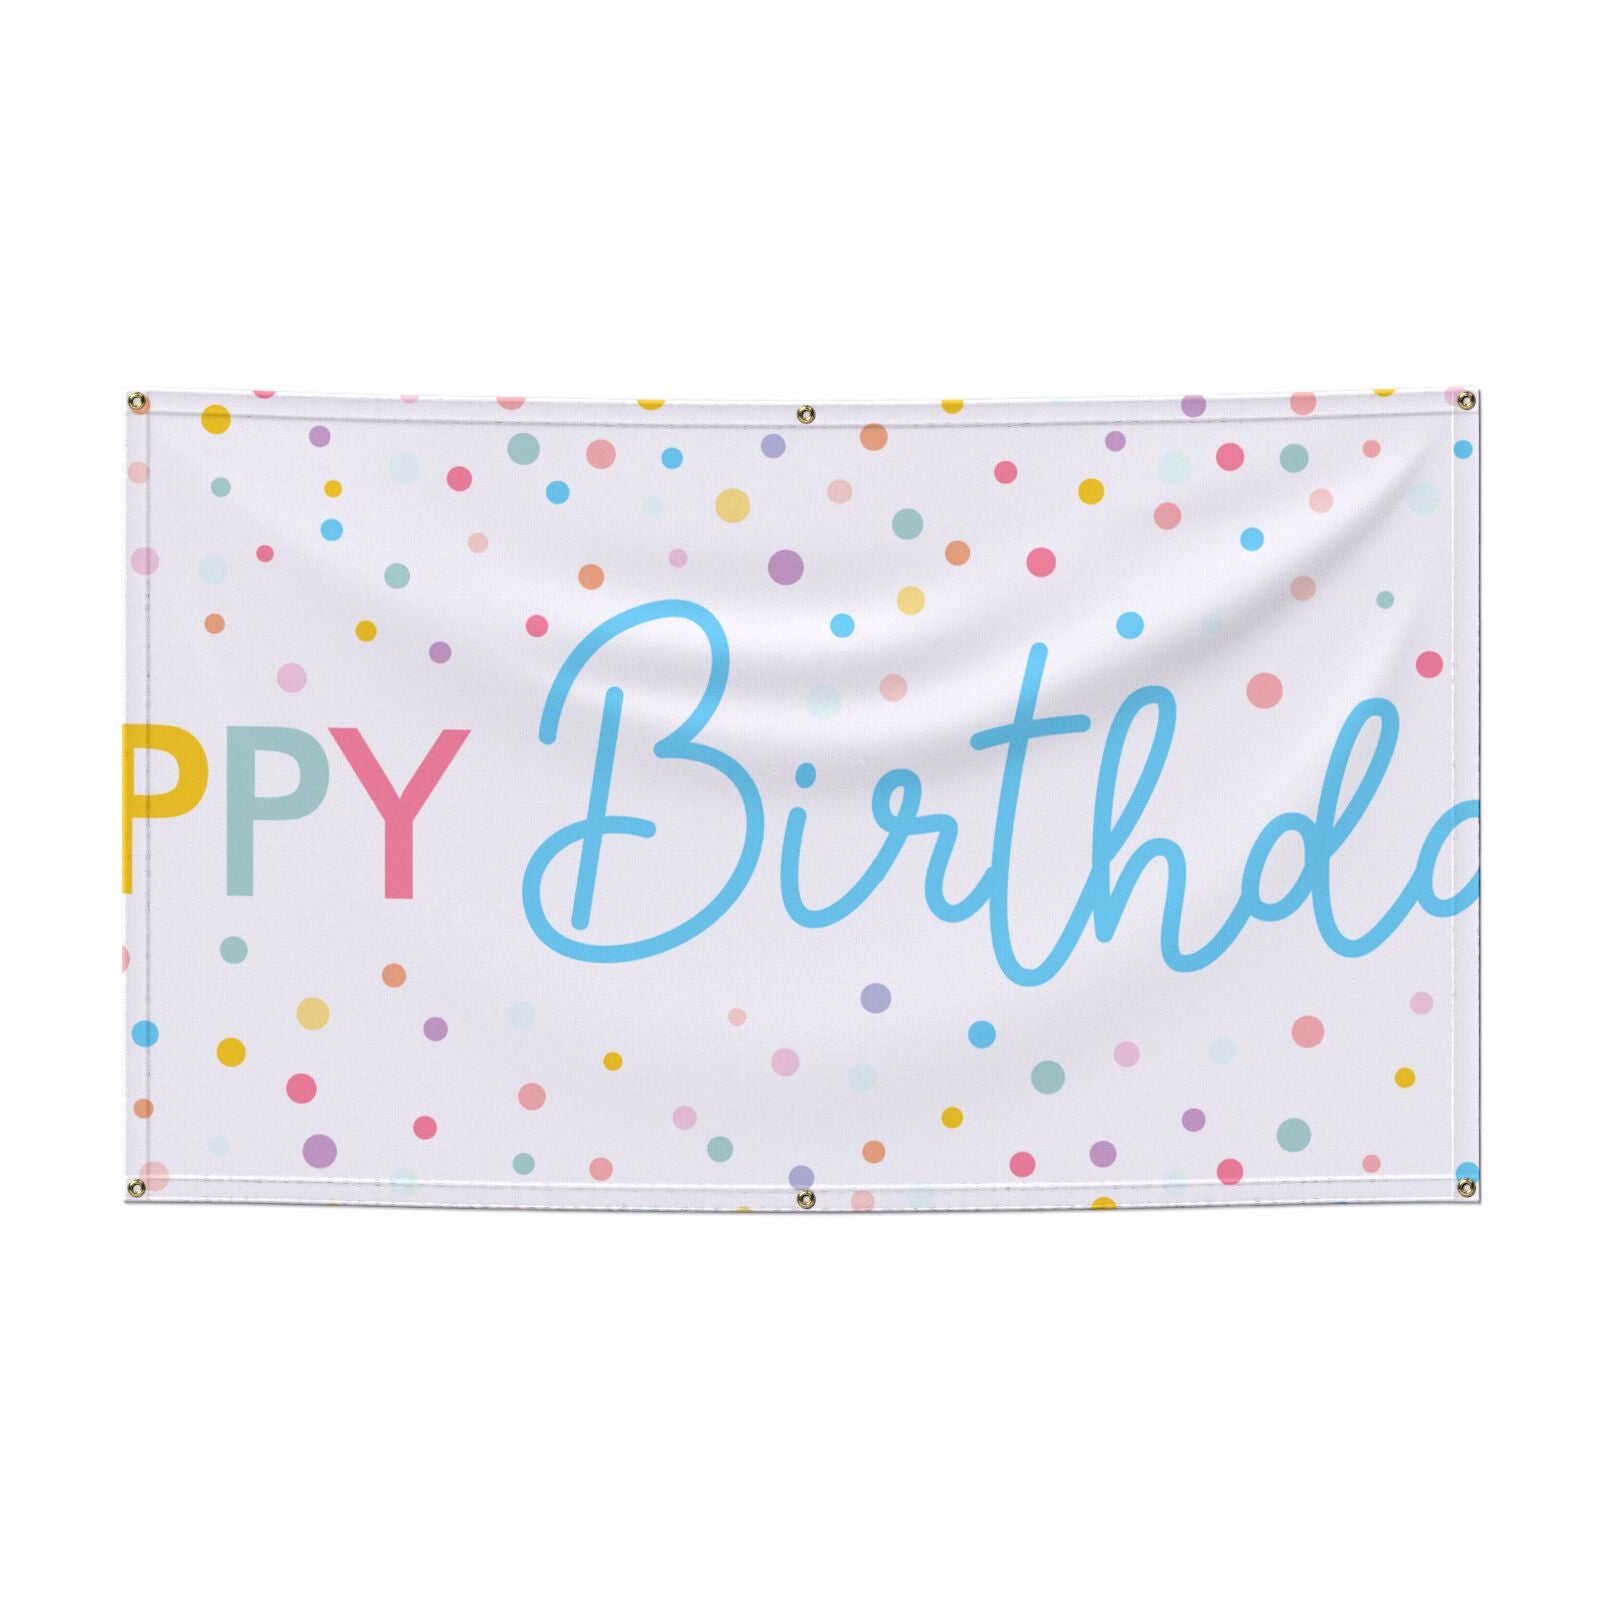 Happy Birthday 5x3 Vinly Banner with Grommets